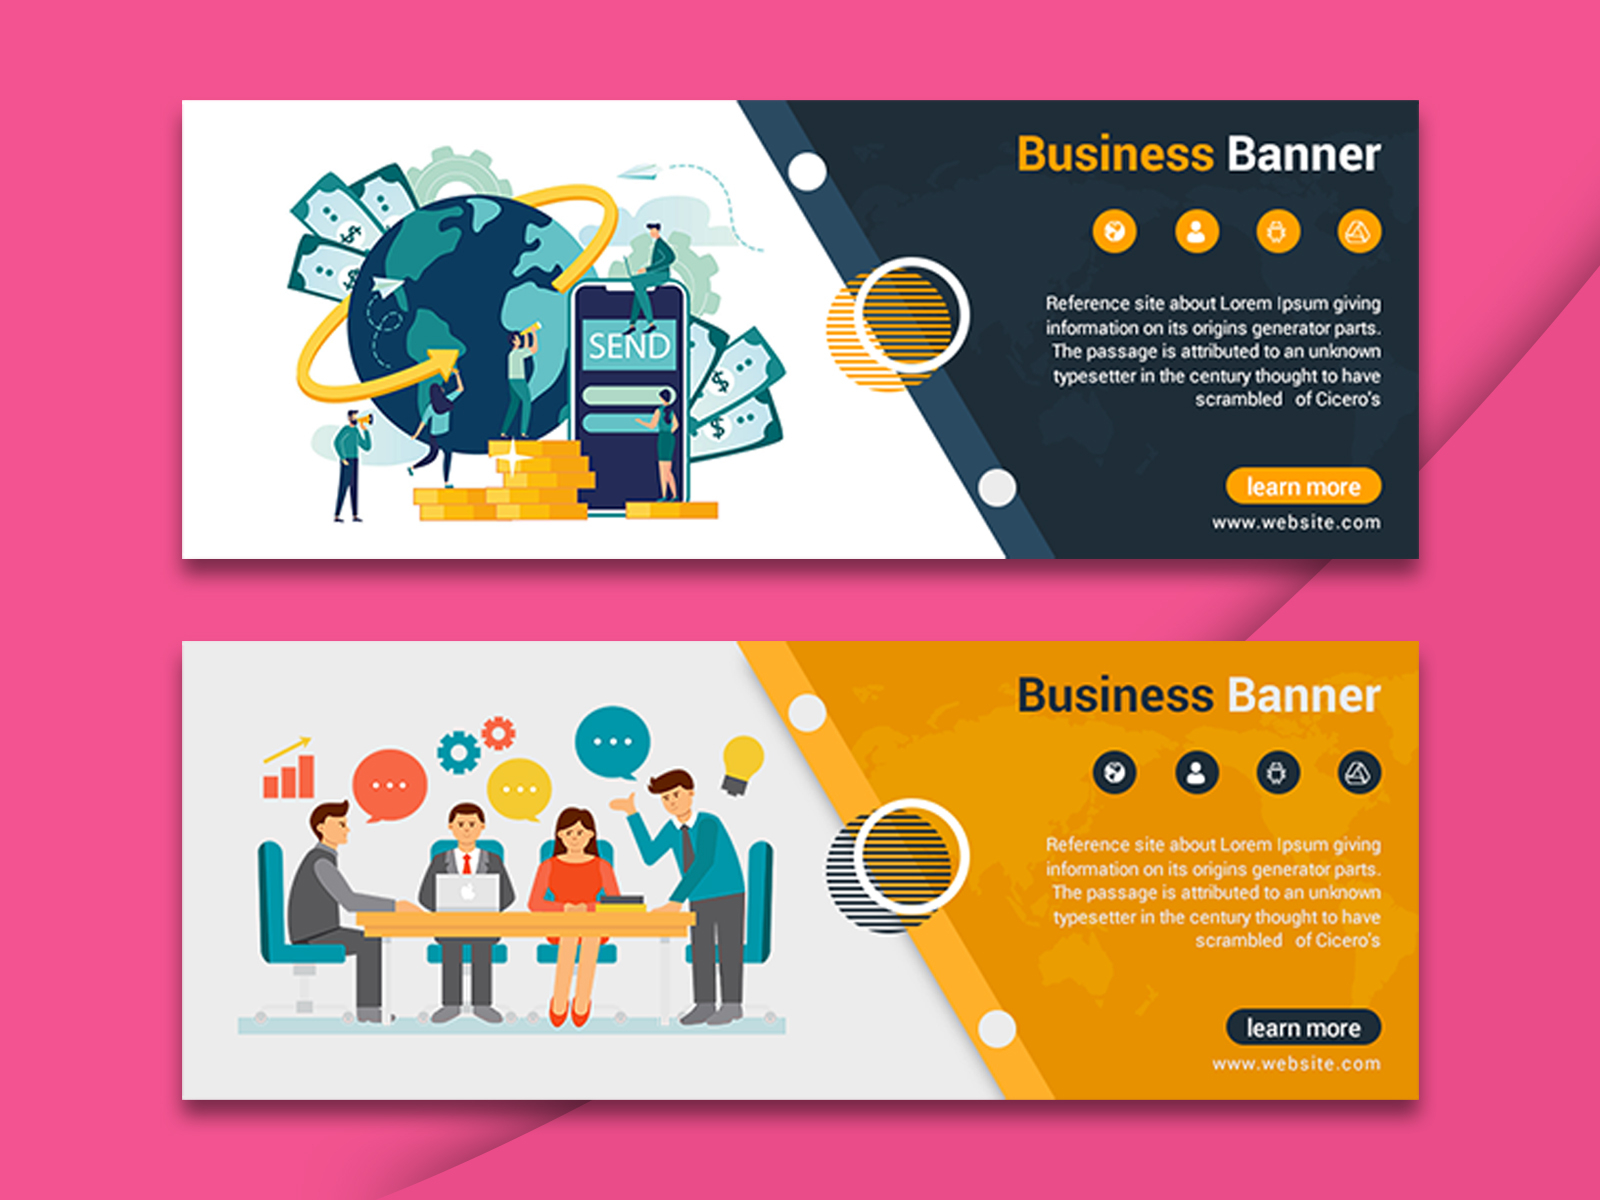 Download Banner Design Vectors and PSD files | Free Download by Arif Islam on Dribbble